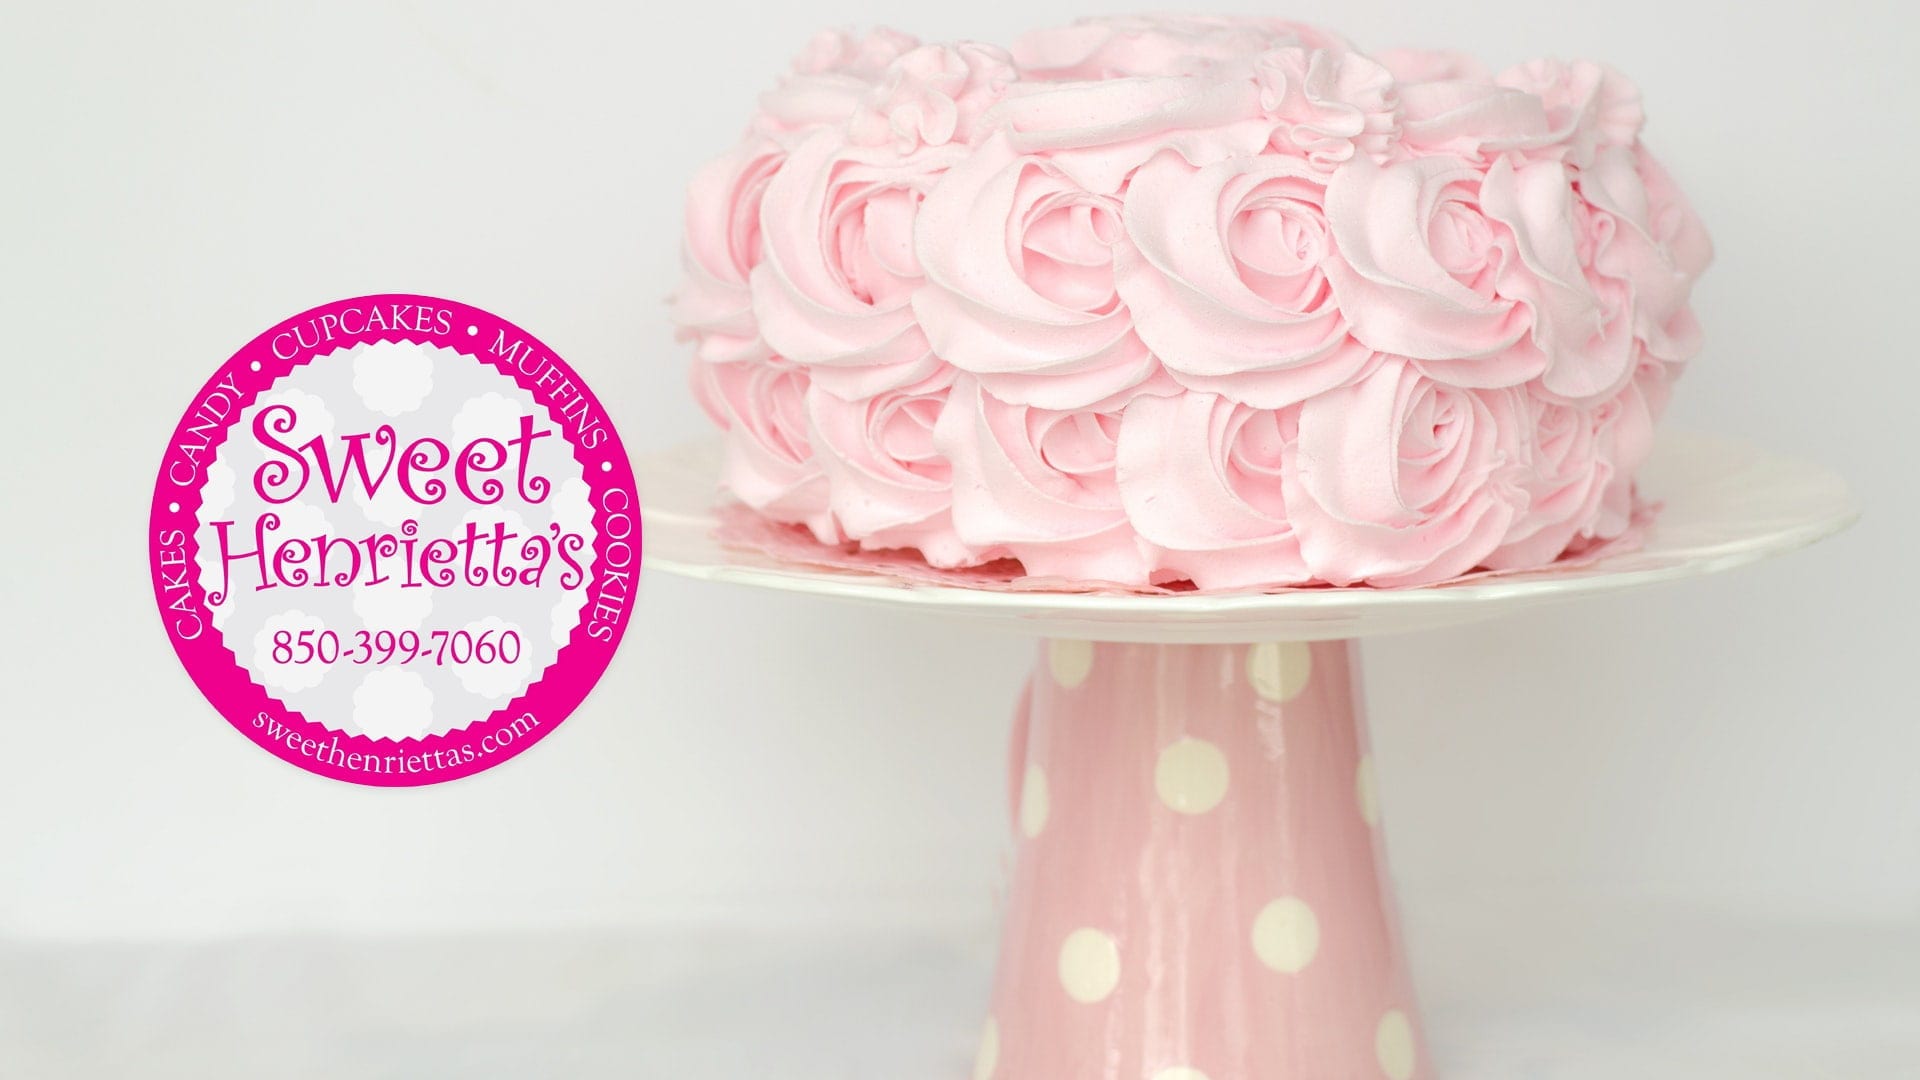 Pink cake with flower design frosting.